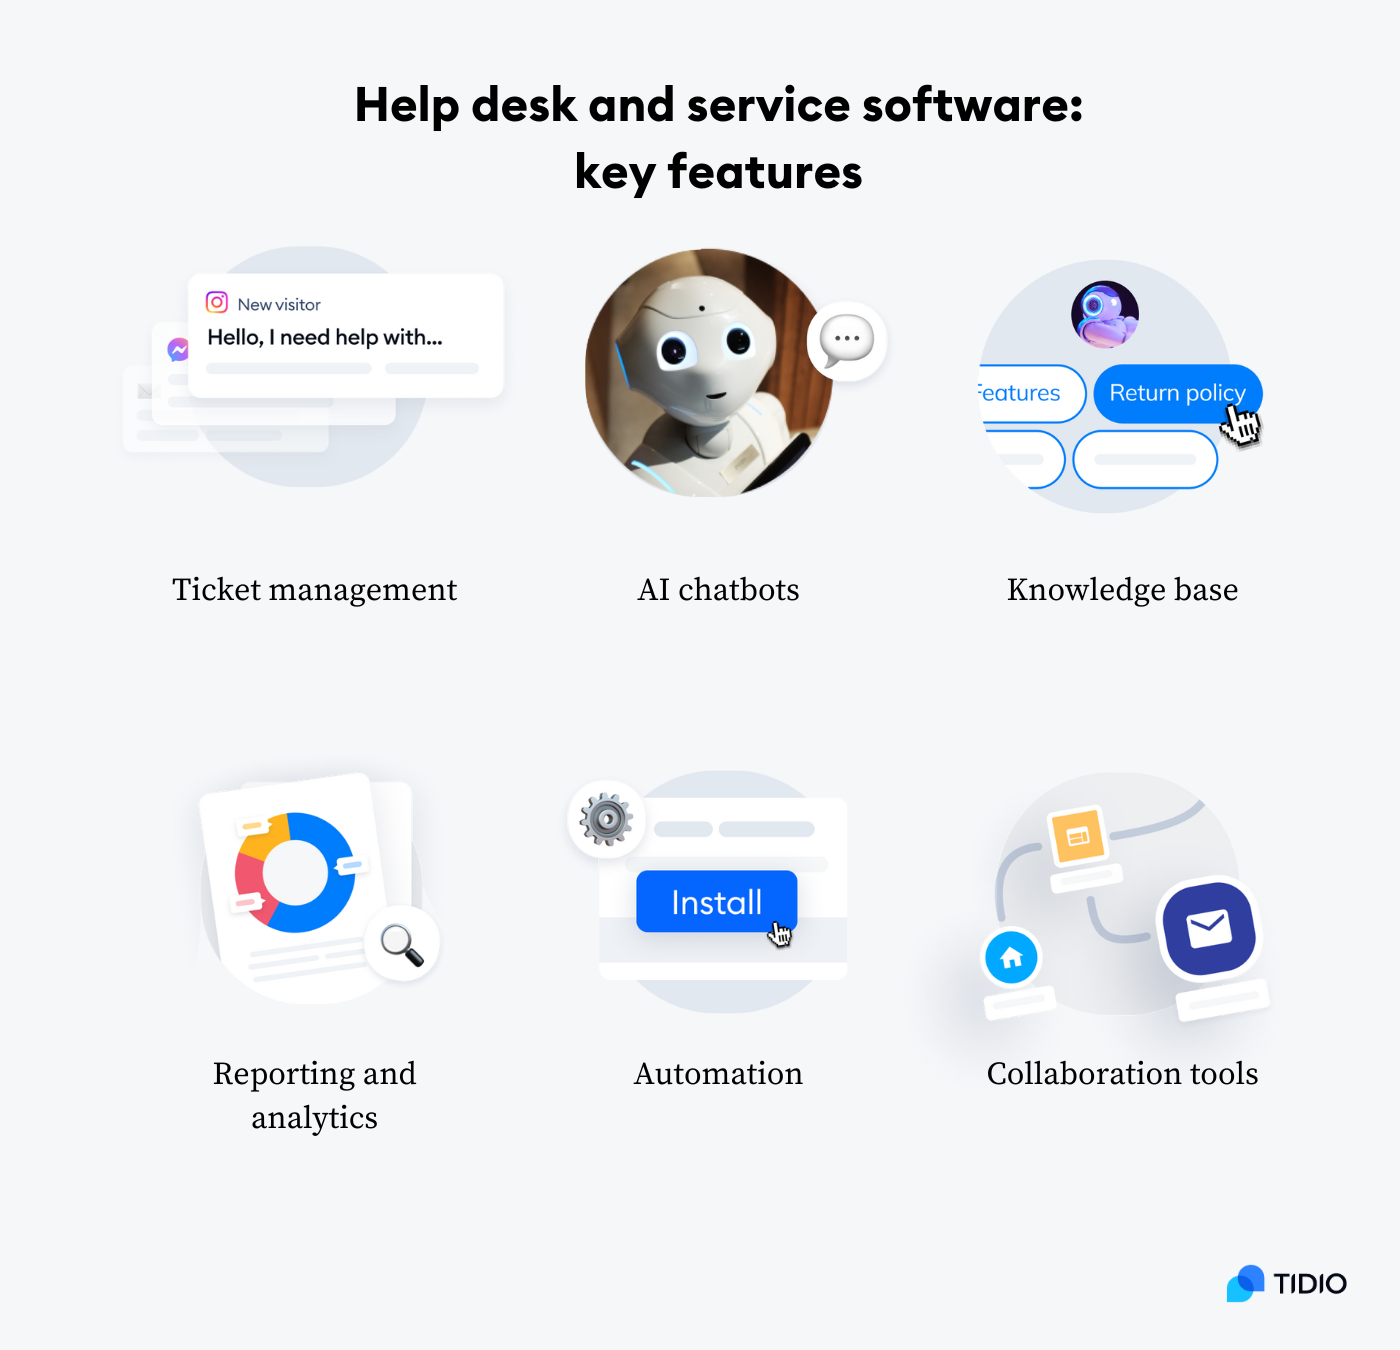 Help desk and service desk tools: key features